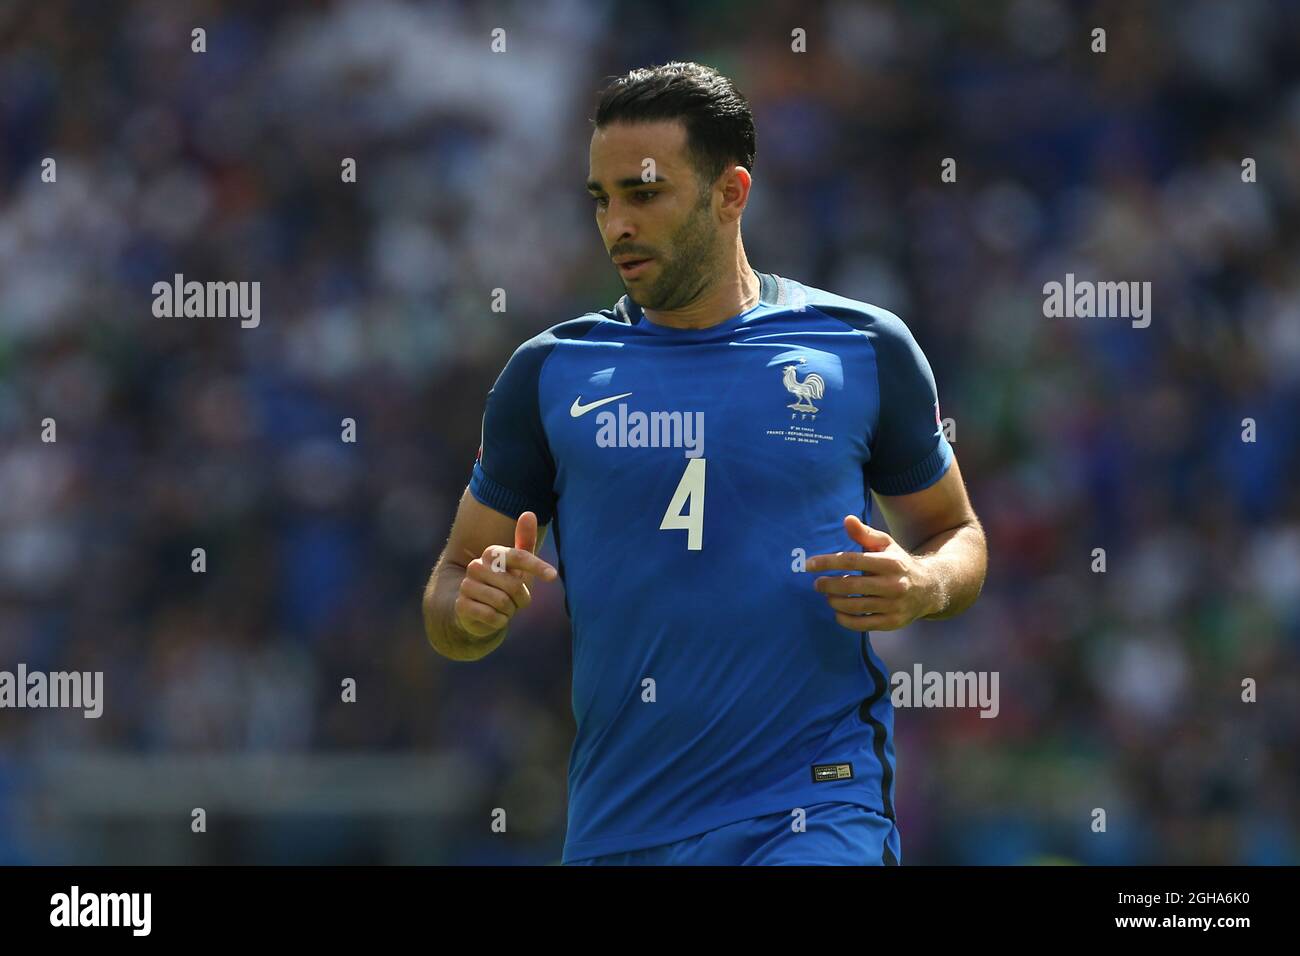 Adil Rami of France during the UEFA European Championship 2016 match at the Stade de Lyon, Lyon. Picture date June 26th, 2016 Pic Phil Oldham/Sportimage via PA Images Stock Photo